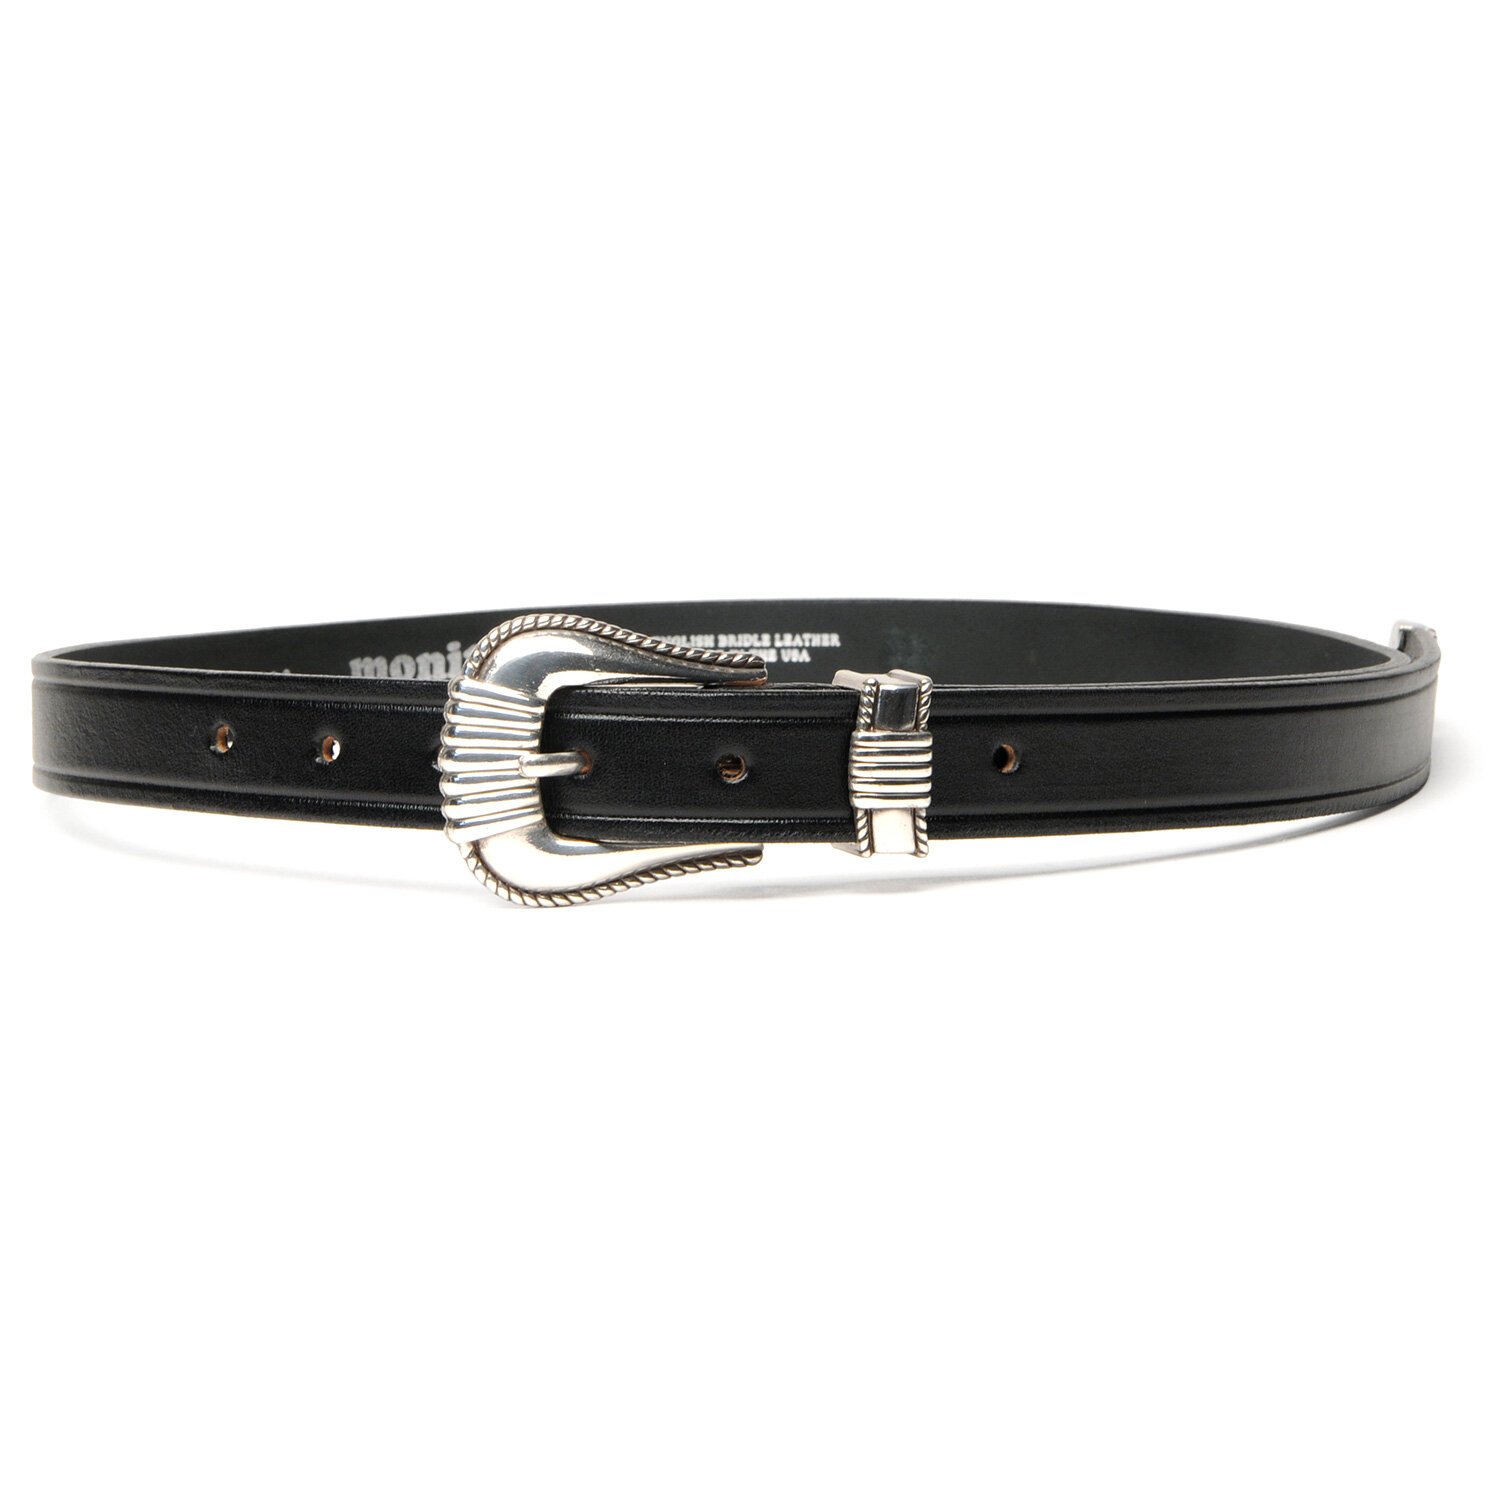 Extended 1" Creased Belt w/ 3-pc Silver Buckle Set